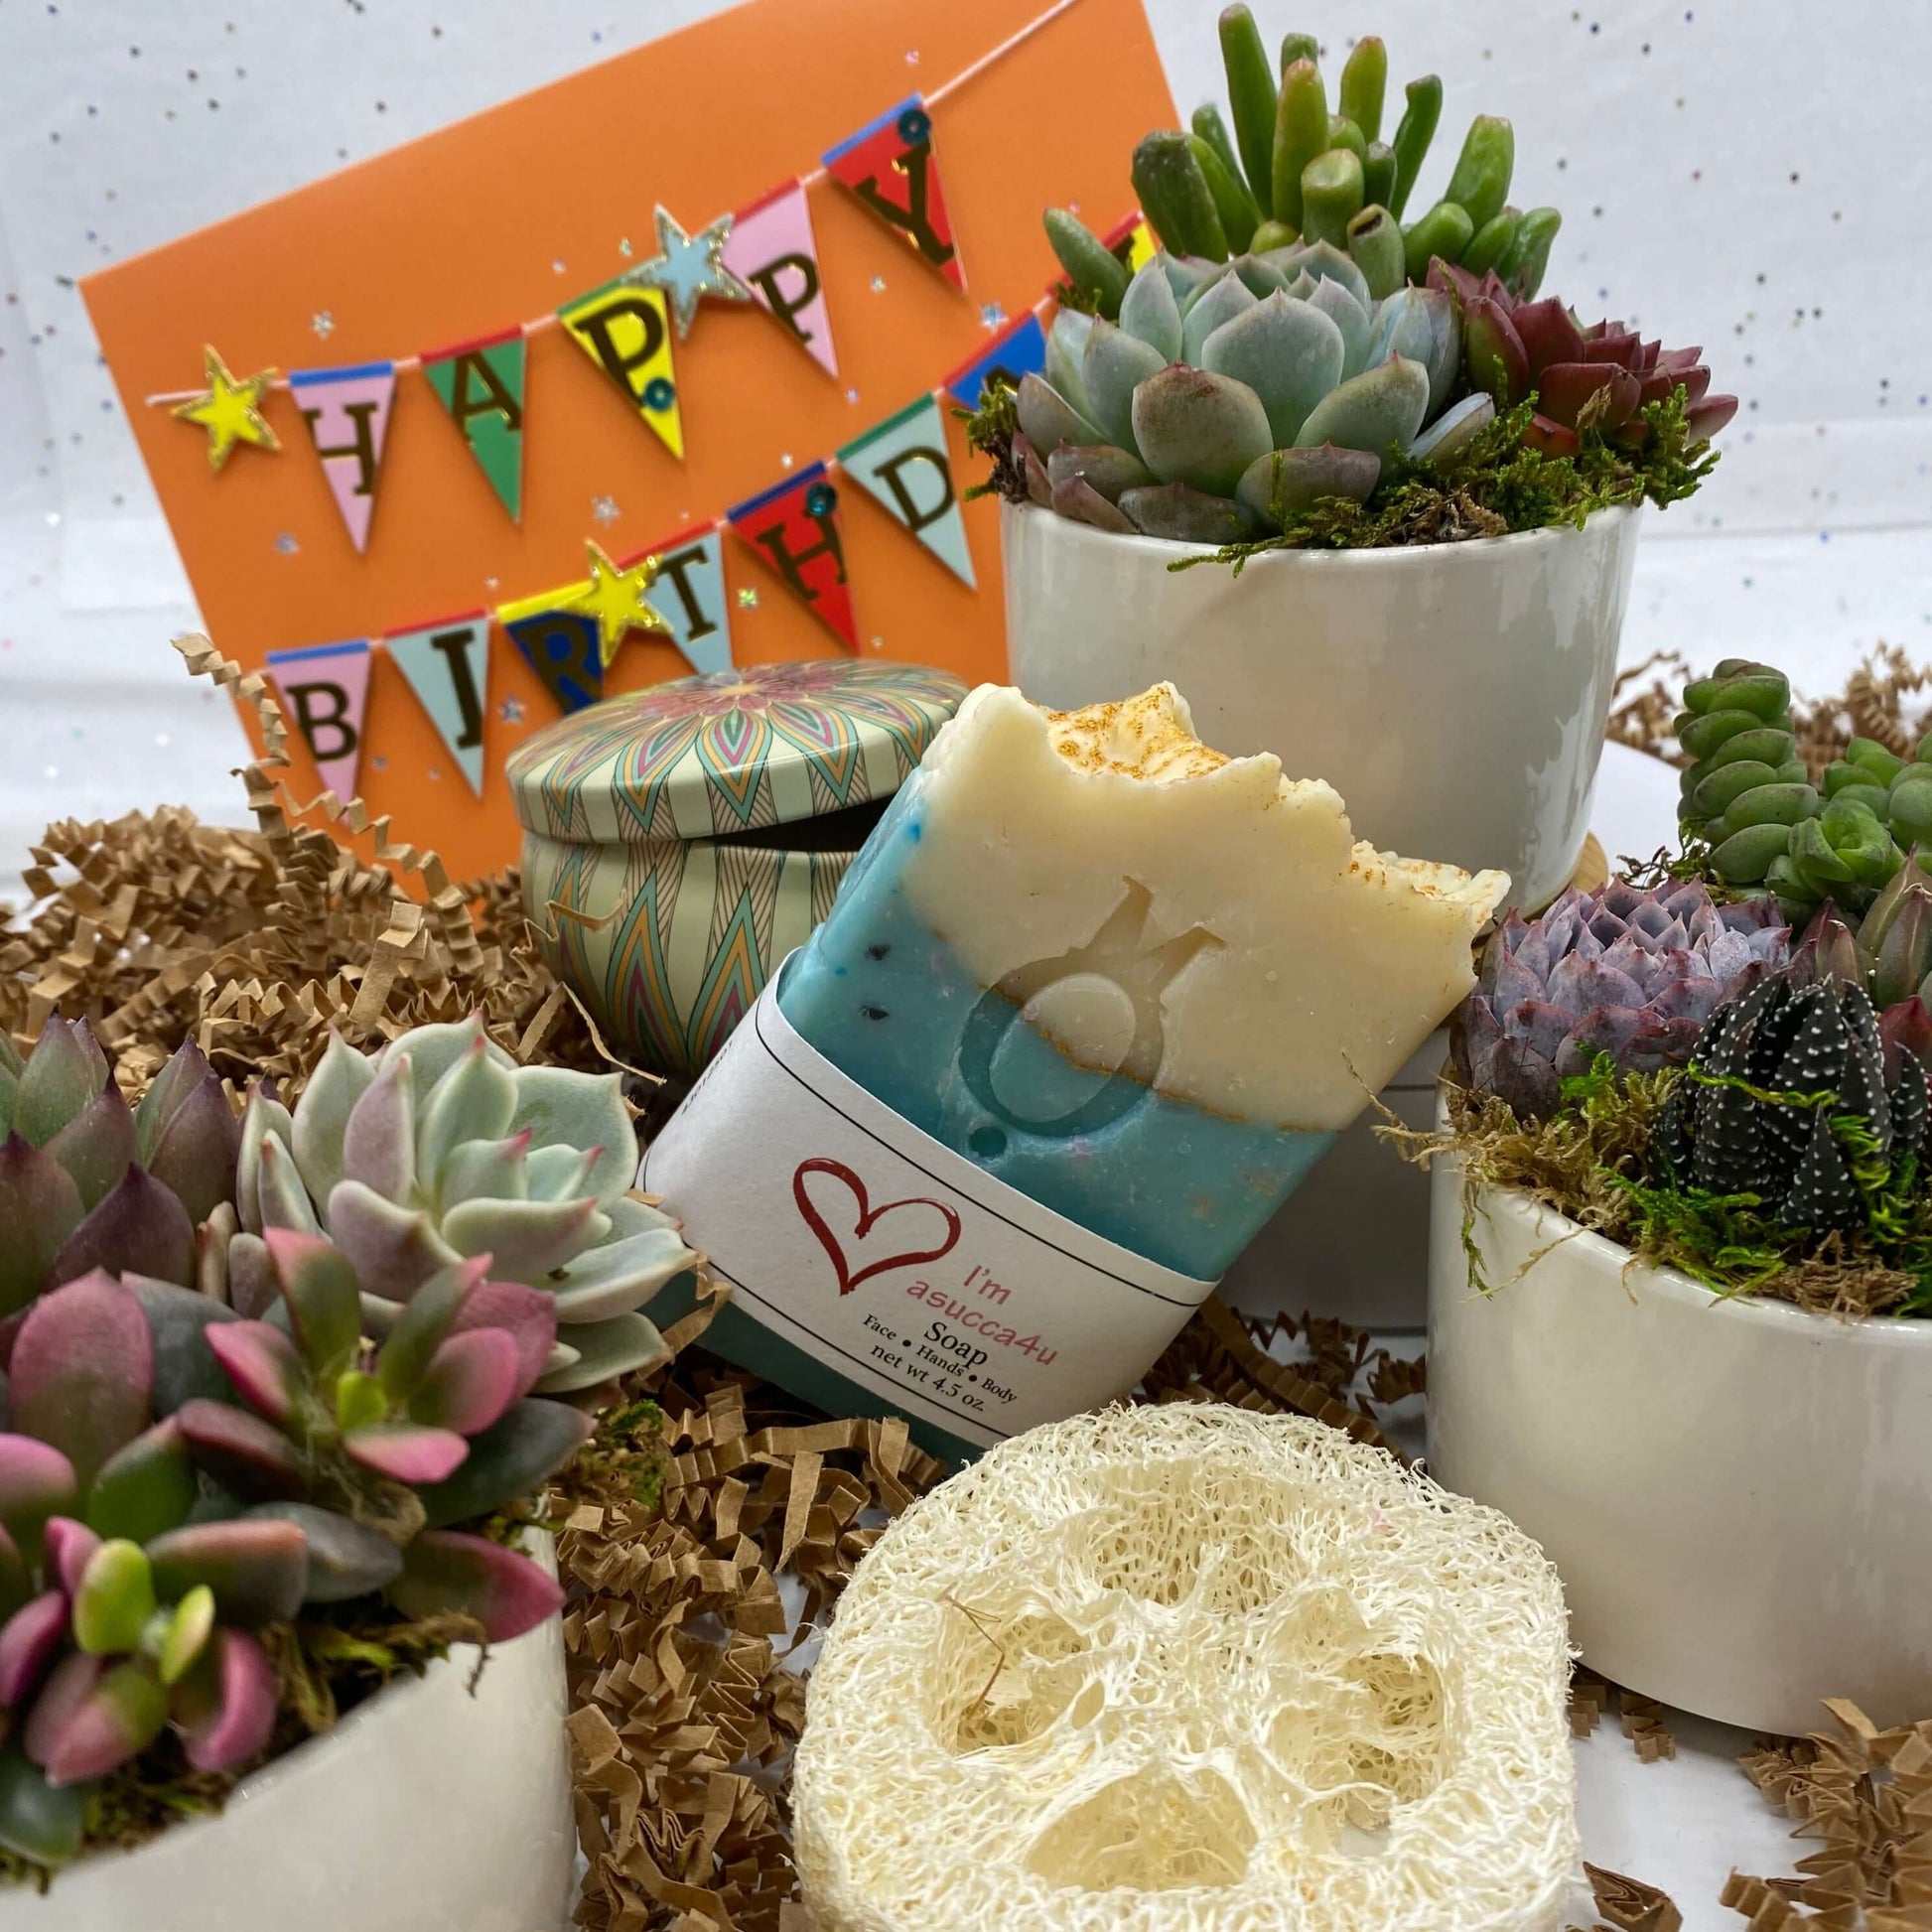 Plant Lovers Birthday Box - Suprise Gift for Plant Lovers